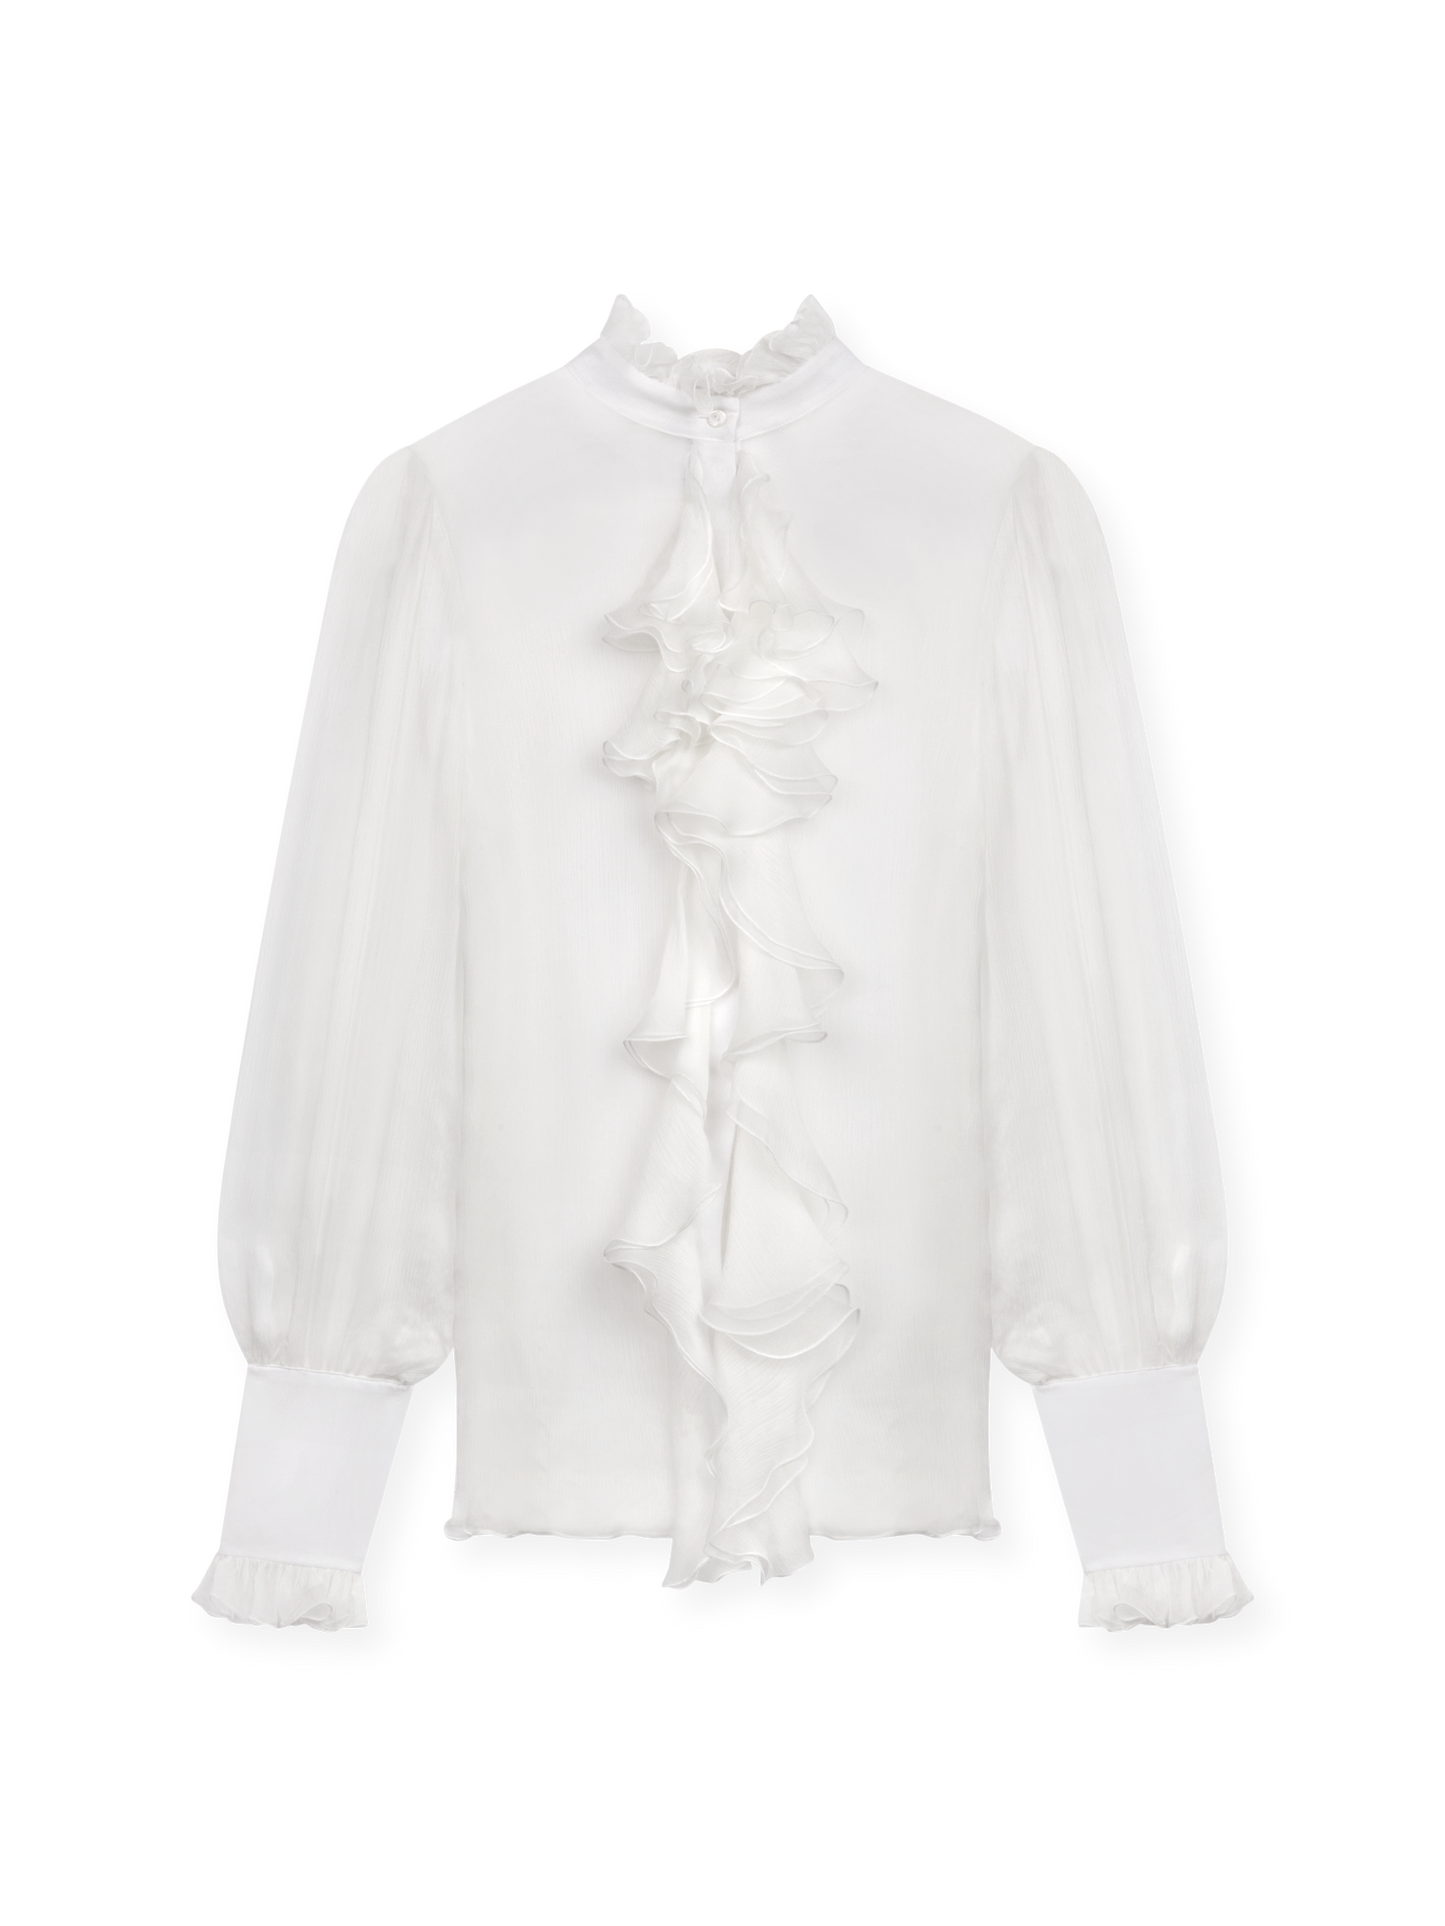 White silk ruffles shirt with jewel buttons – Redemption Official